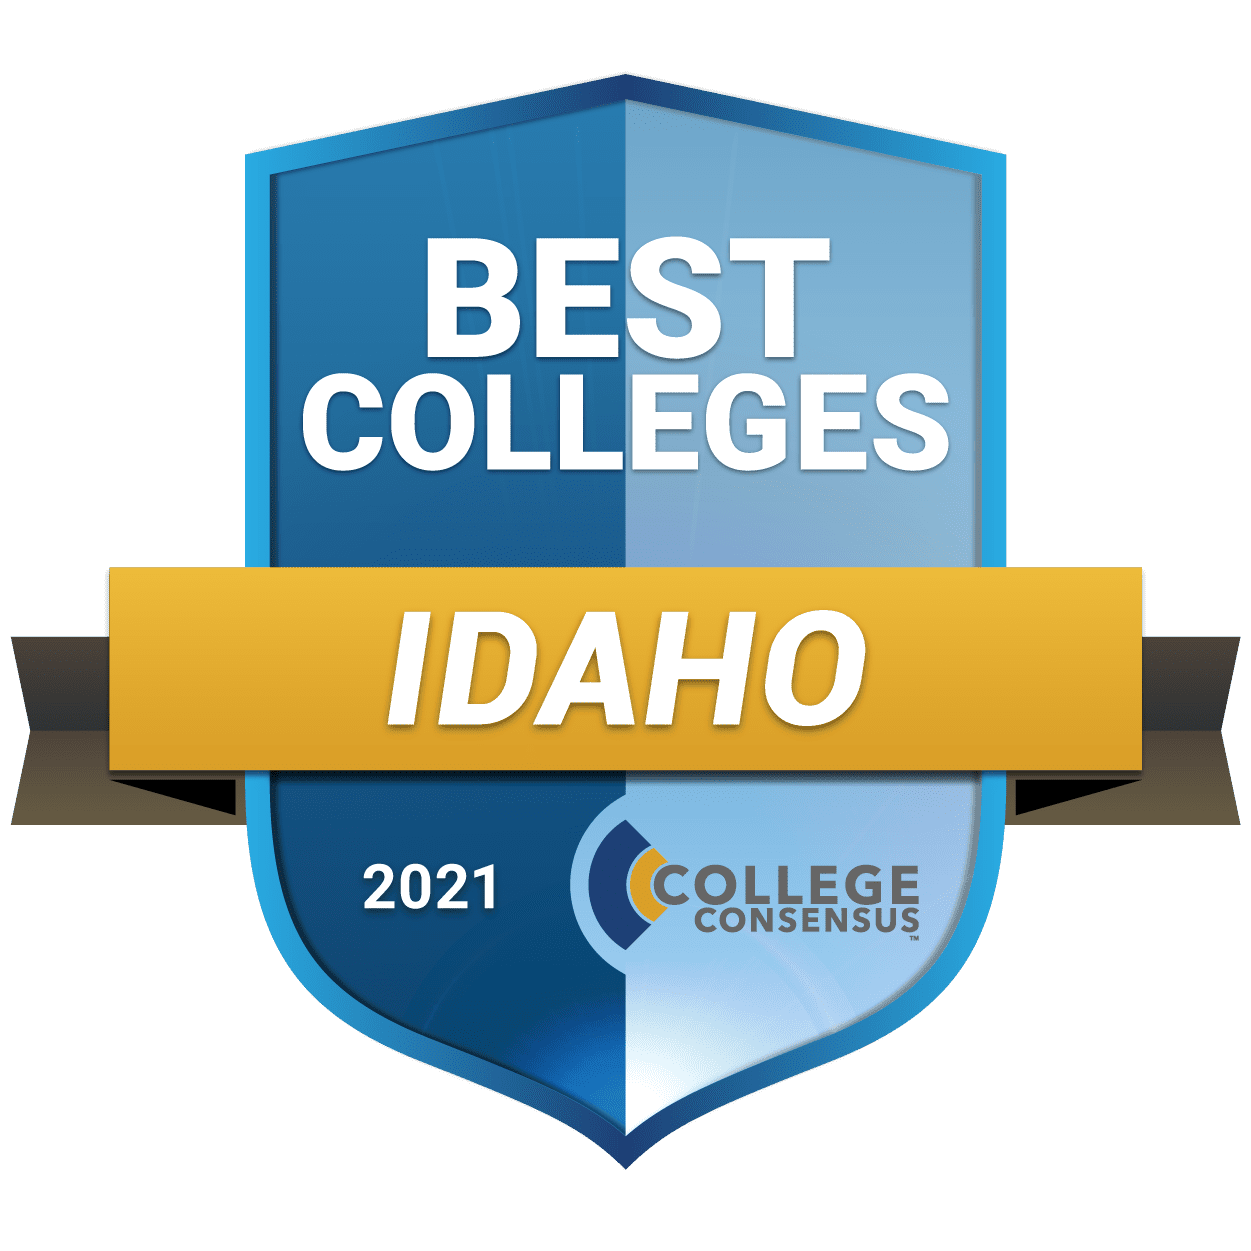 Best Colleges And Universities In Idaho Top Consensus Ranked Schools In Idaho 2021 1485